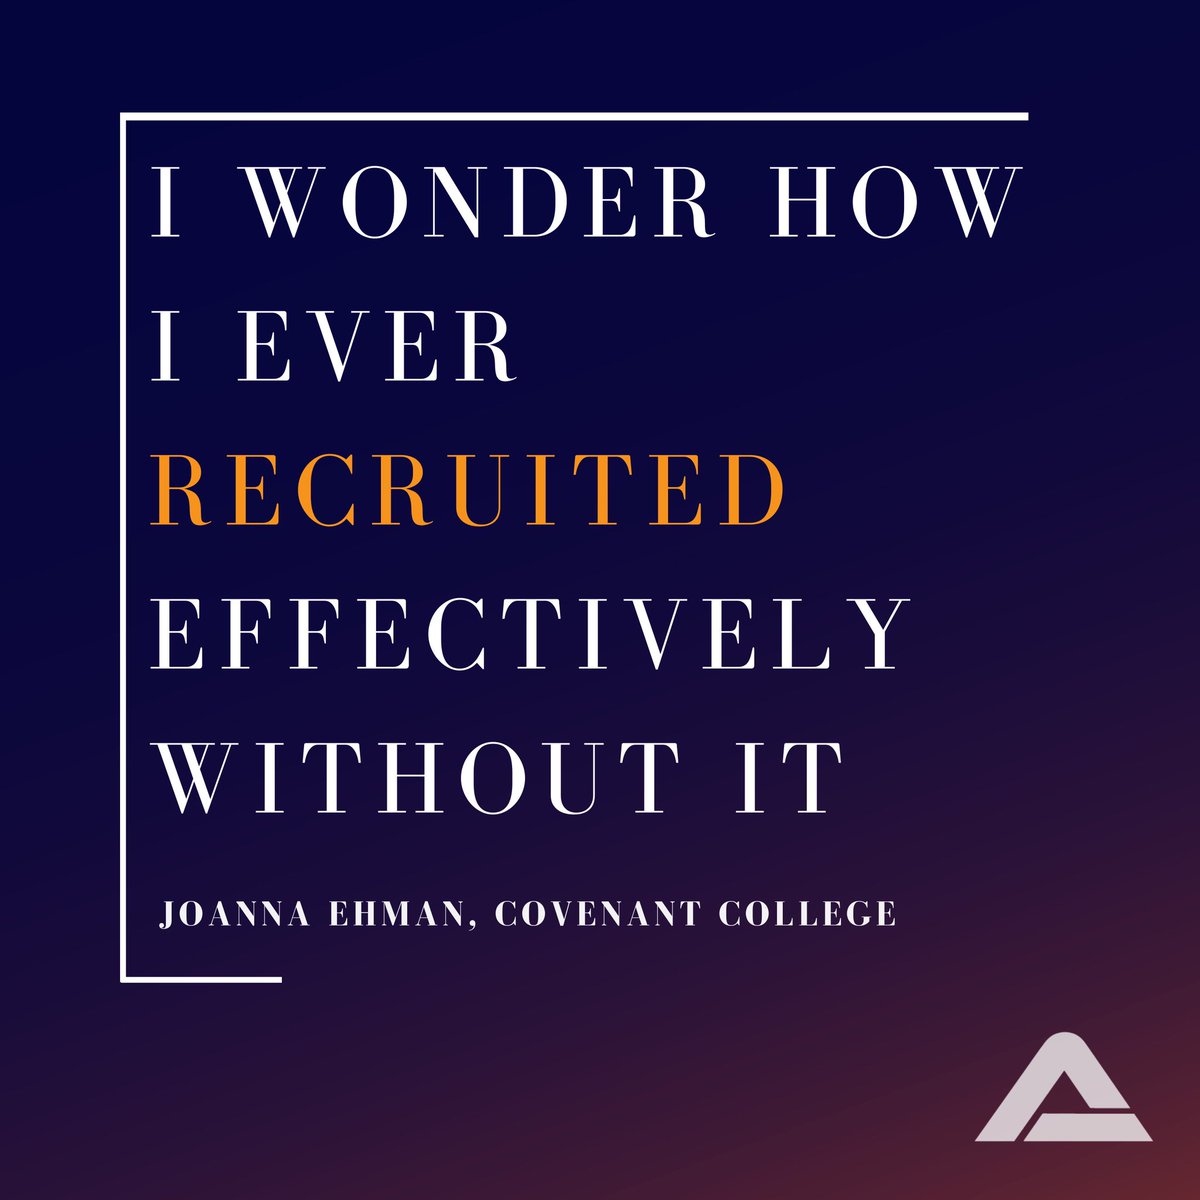 Always great to hear what coaches think about ARI. Reach out (on our website or DM us) and join the ARI family! #recruitsmarter #arirecruiting #arifamily